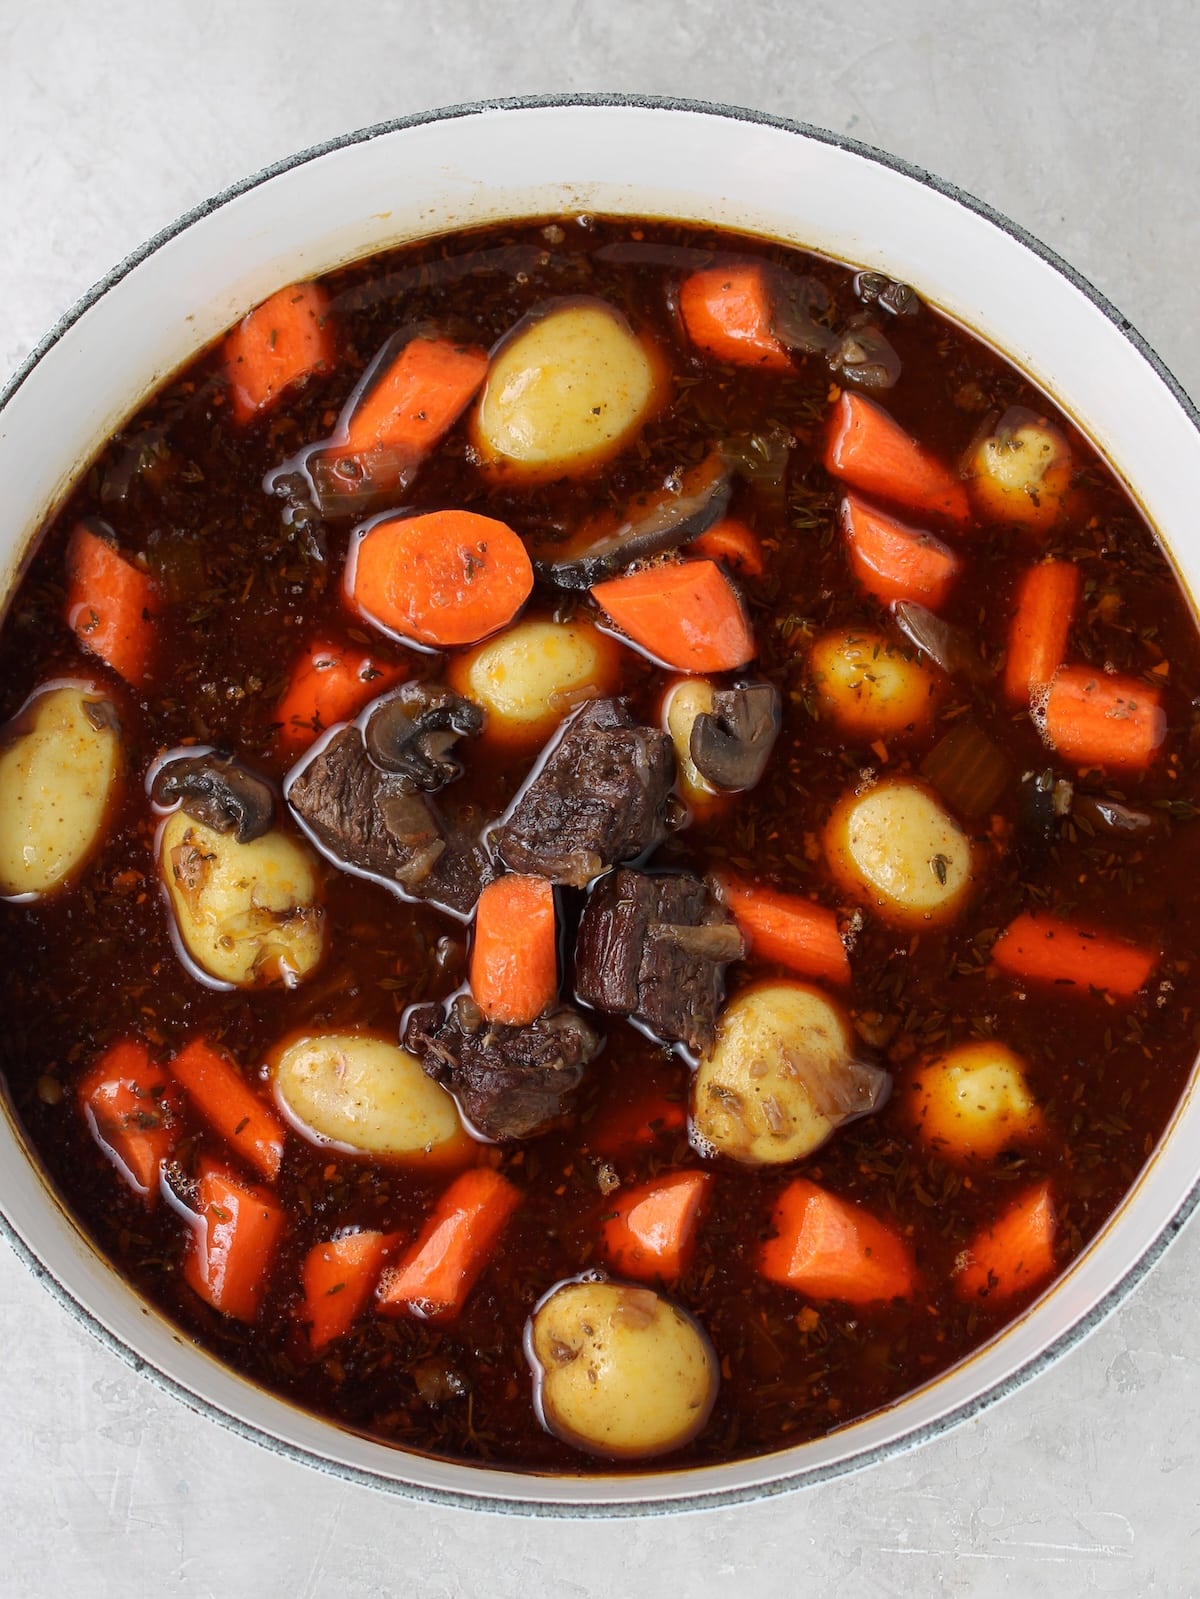 Carrots and potatoes are added to beef stew.